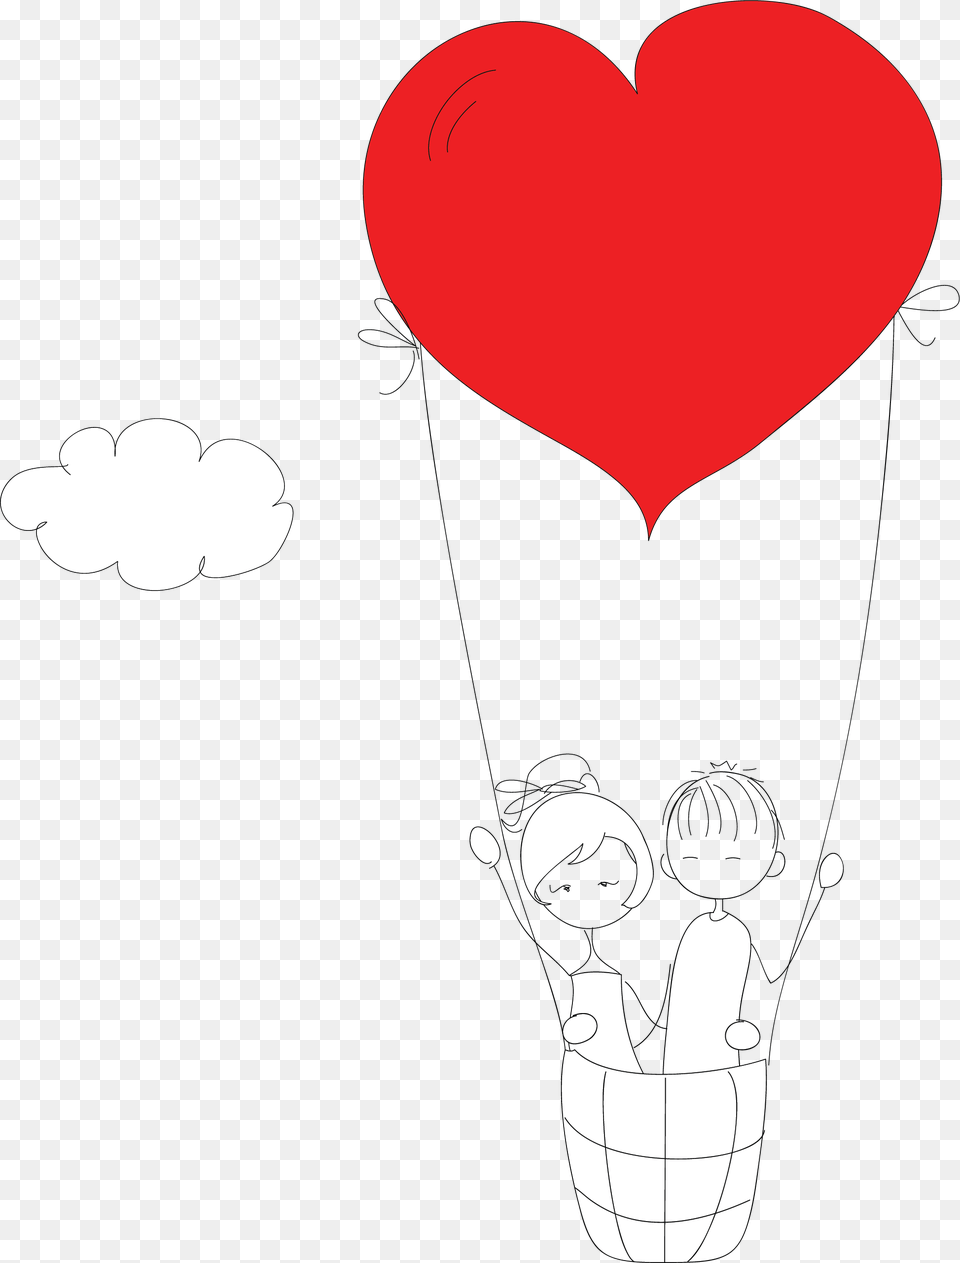 Heart, Balloon, Face, Head, Person Png Image